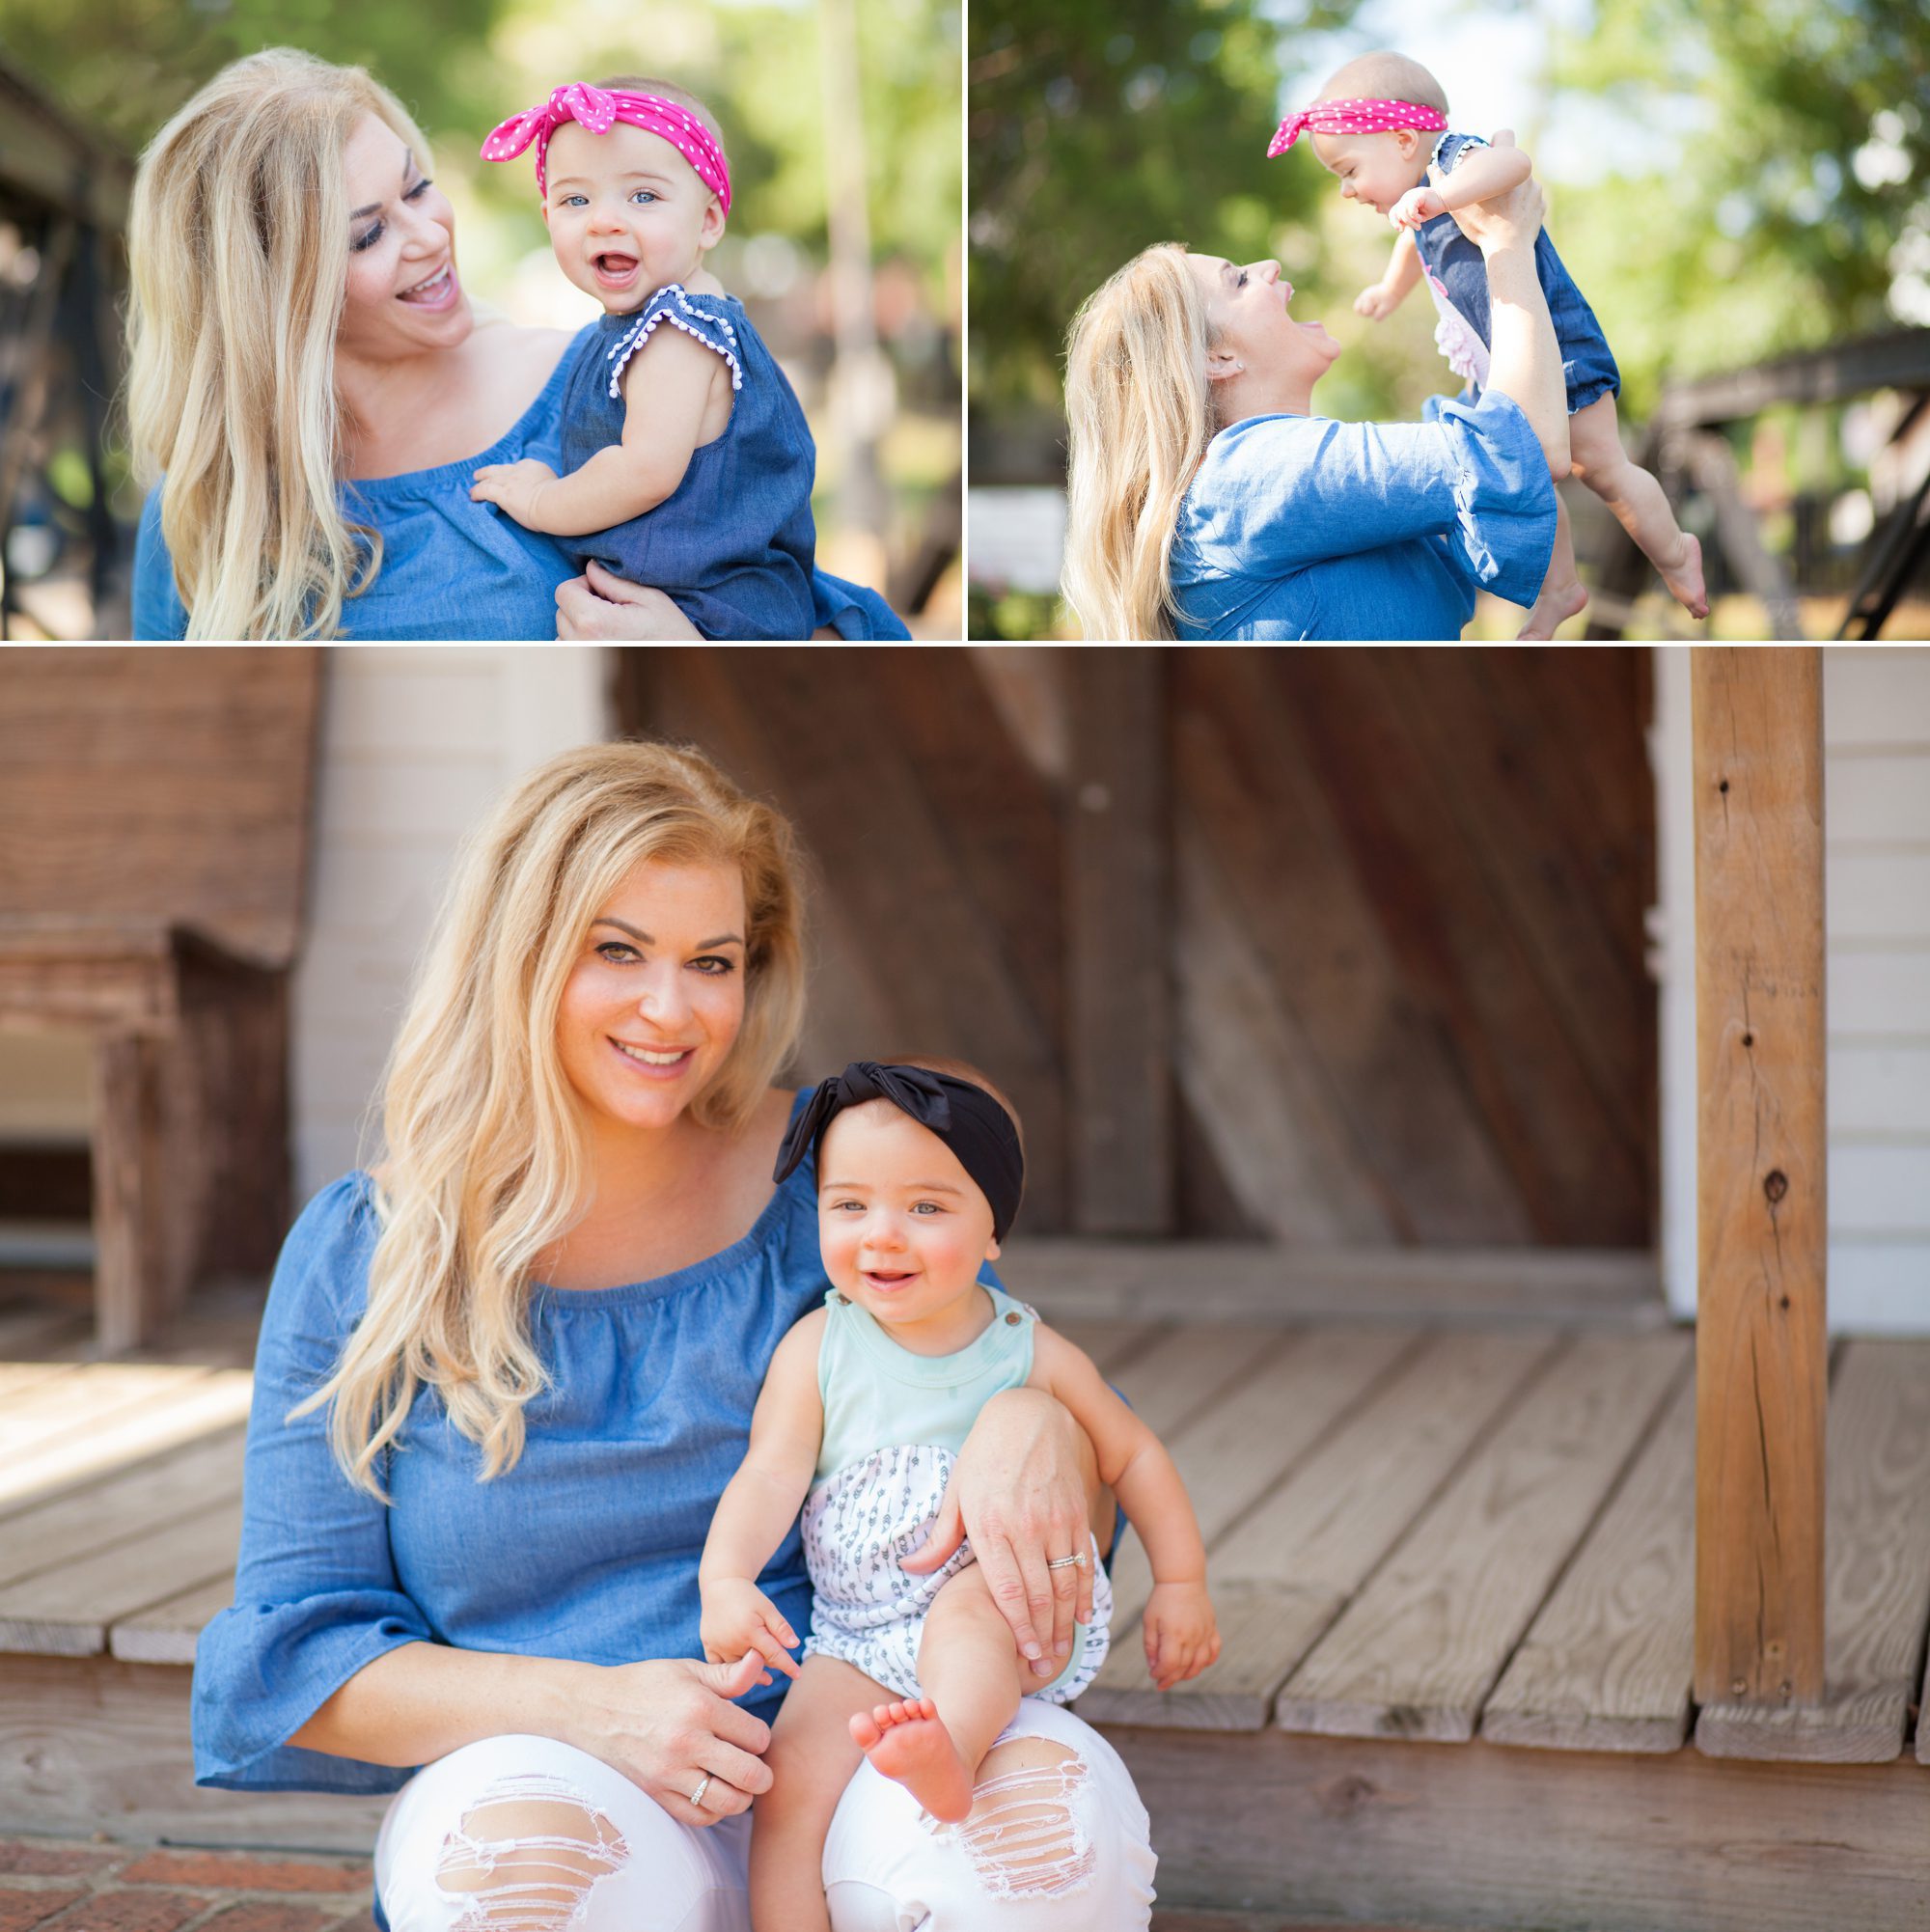 6 month old Collins at her family photography shoot in Murfreesboro TN, photo by Krista Lee Photography